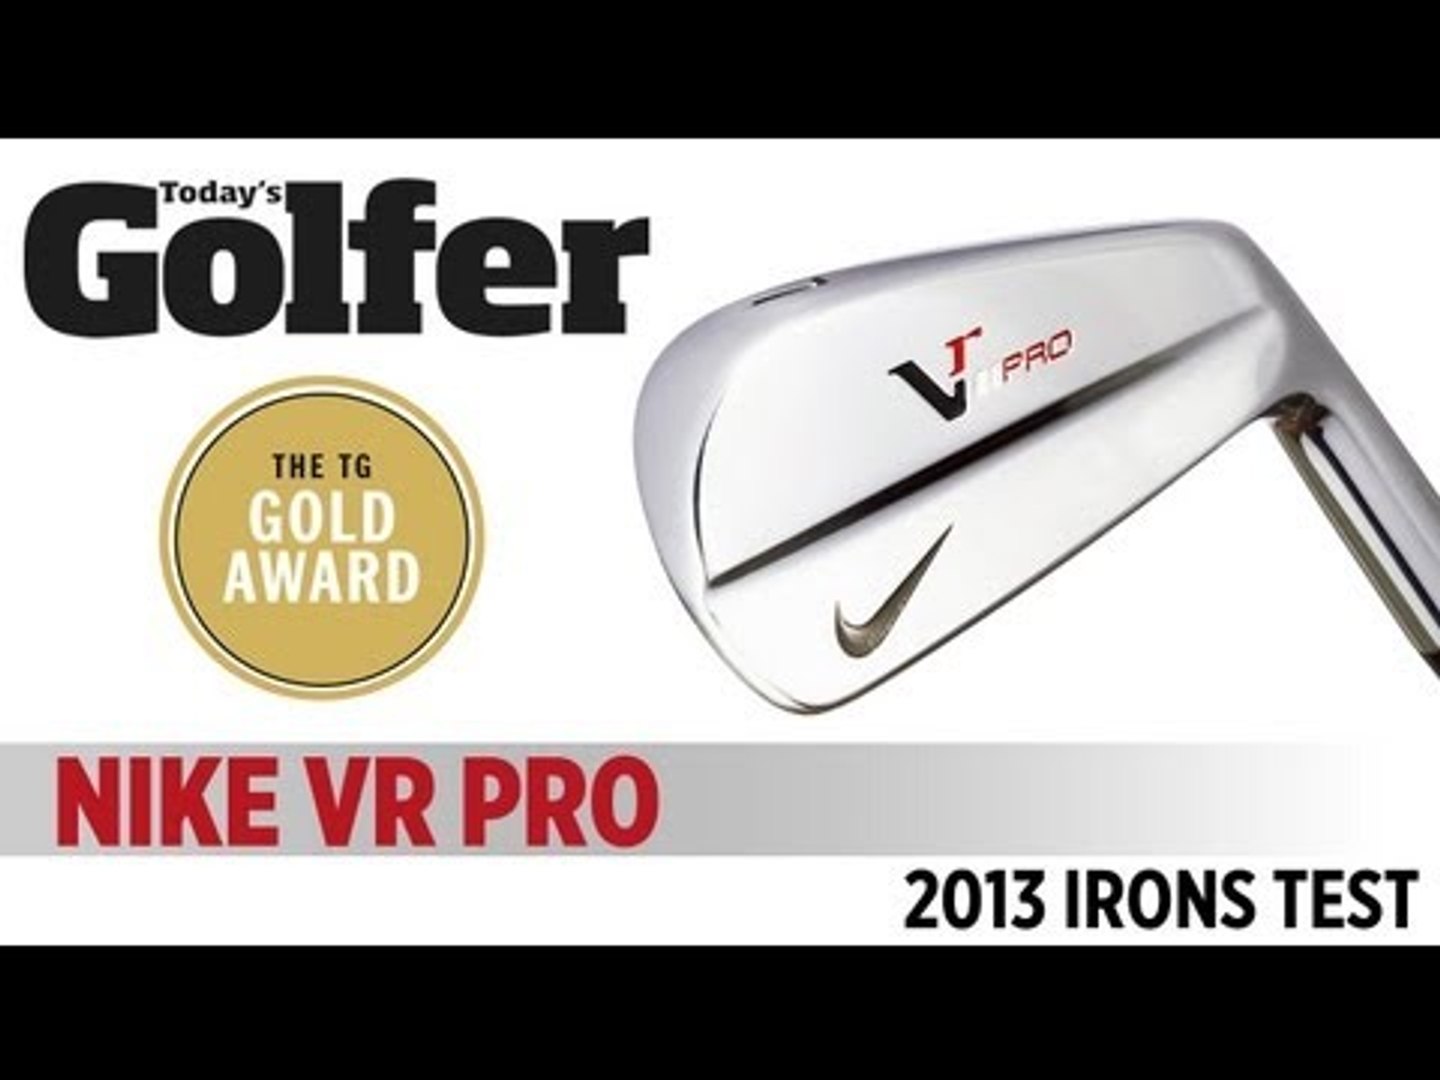 Nike VR Pro - Gold Award 2013 Irons Test - Today's Golfer - video  Dailymotion